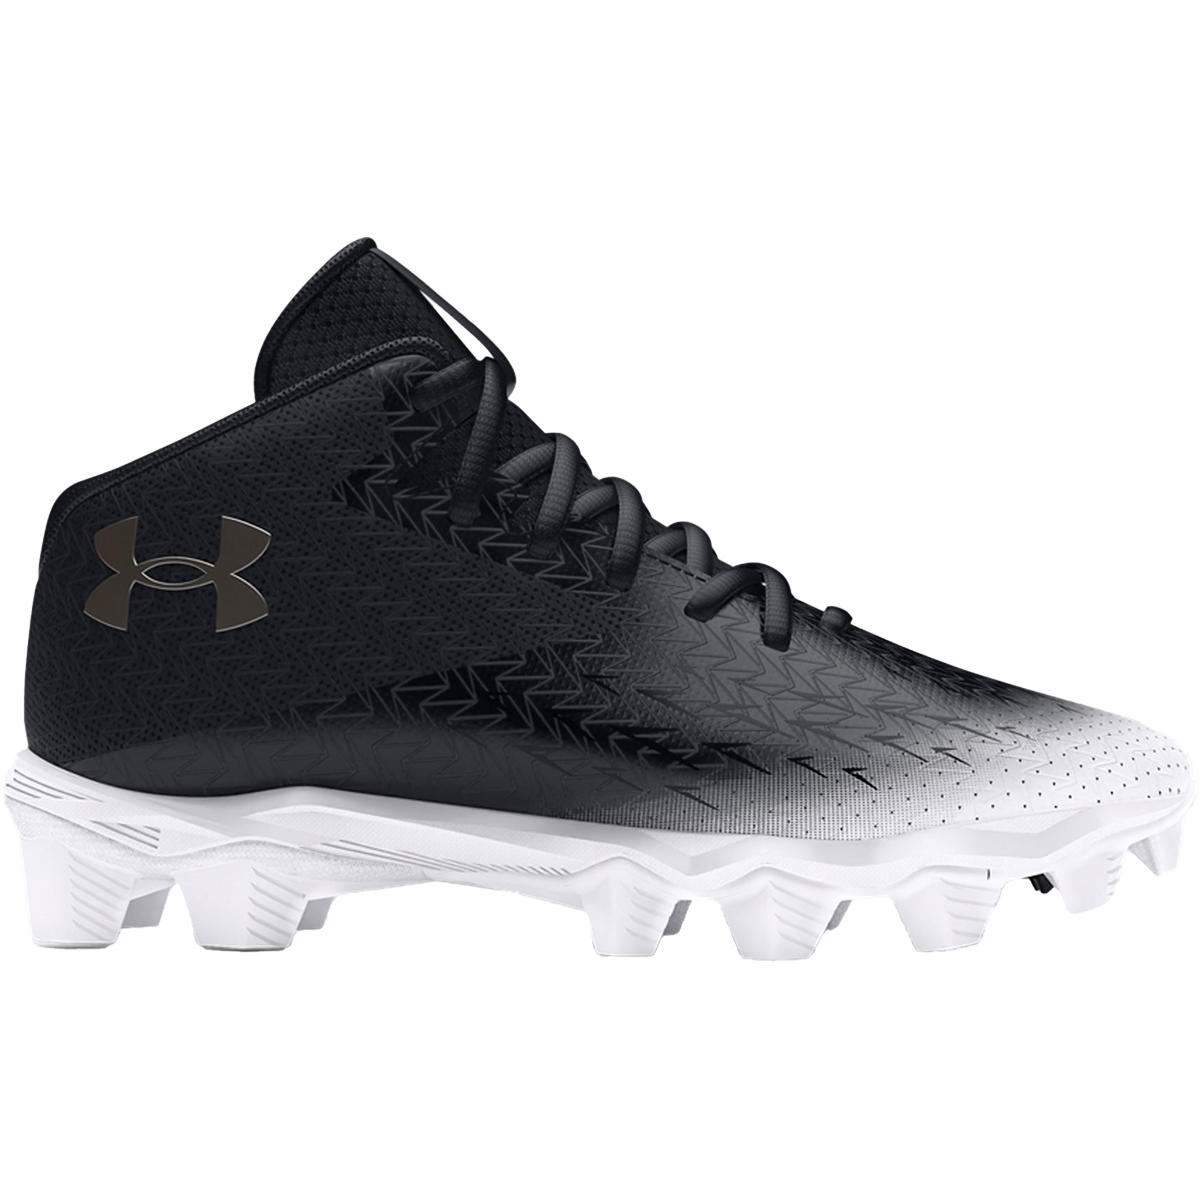 Youth Spotlight Franchise RM 4.0 Football Cleats alternate view